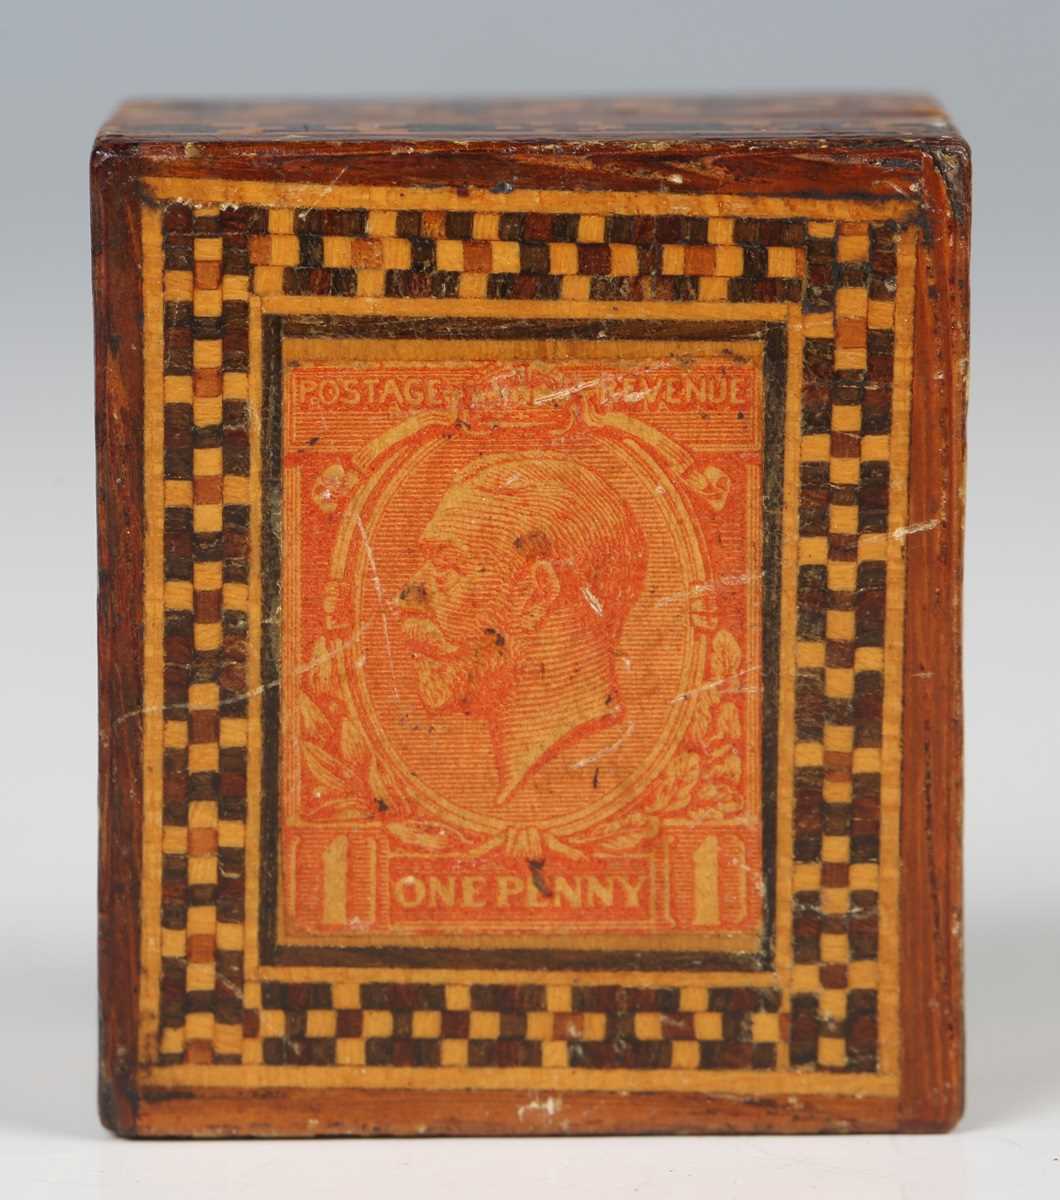 An Edwardian Tunbridge ware stamp box, the lid with an applied 'One Penny' stamp, length 3.8cm, - Image 2 of 9